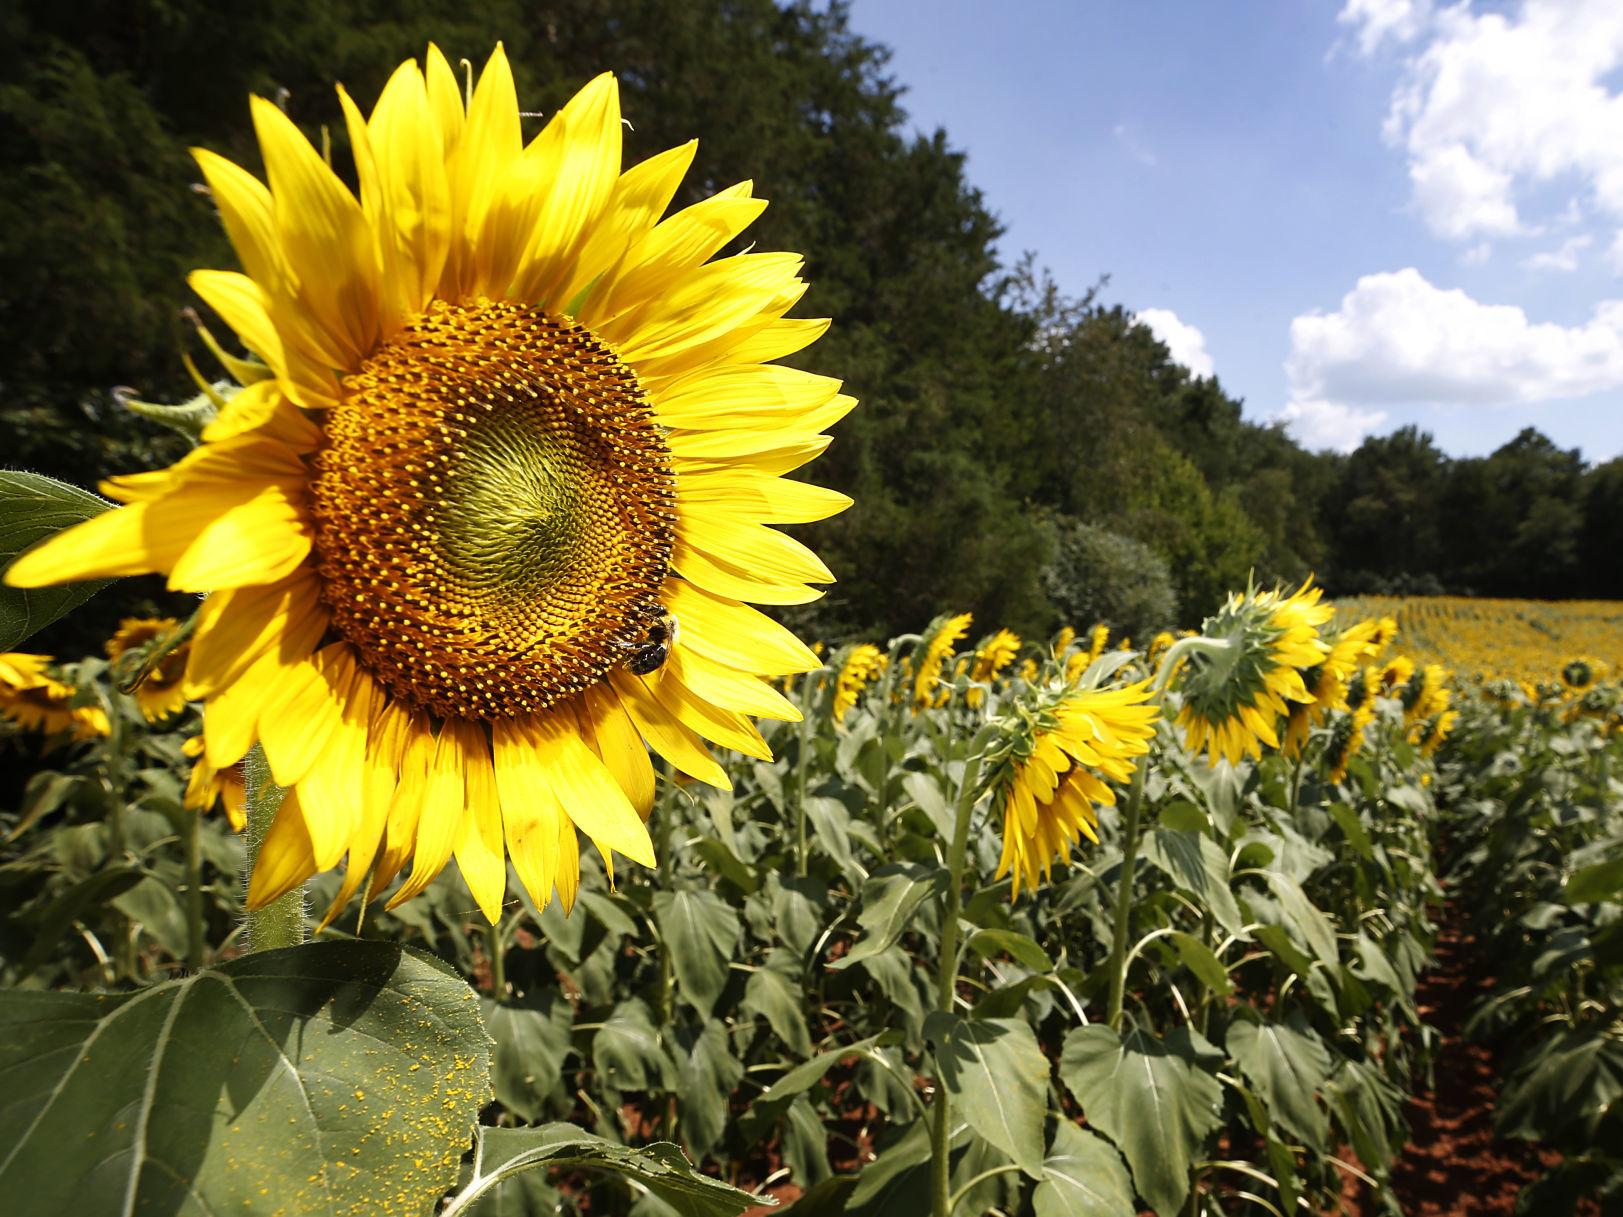 Insta Worthy Sunflower Festival At Alvis Farms In Goochland This